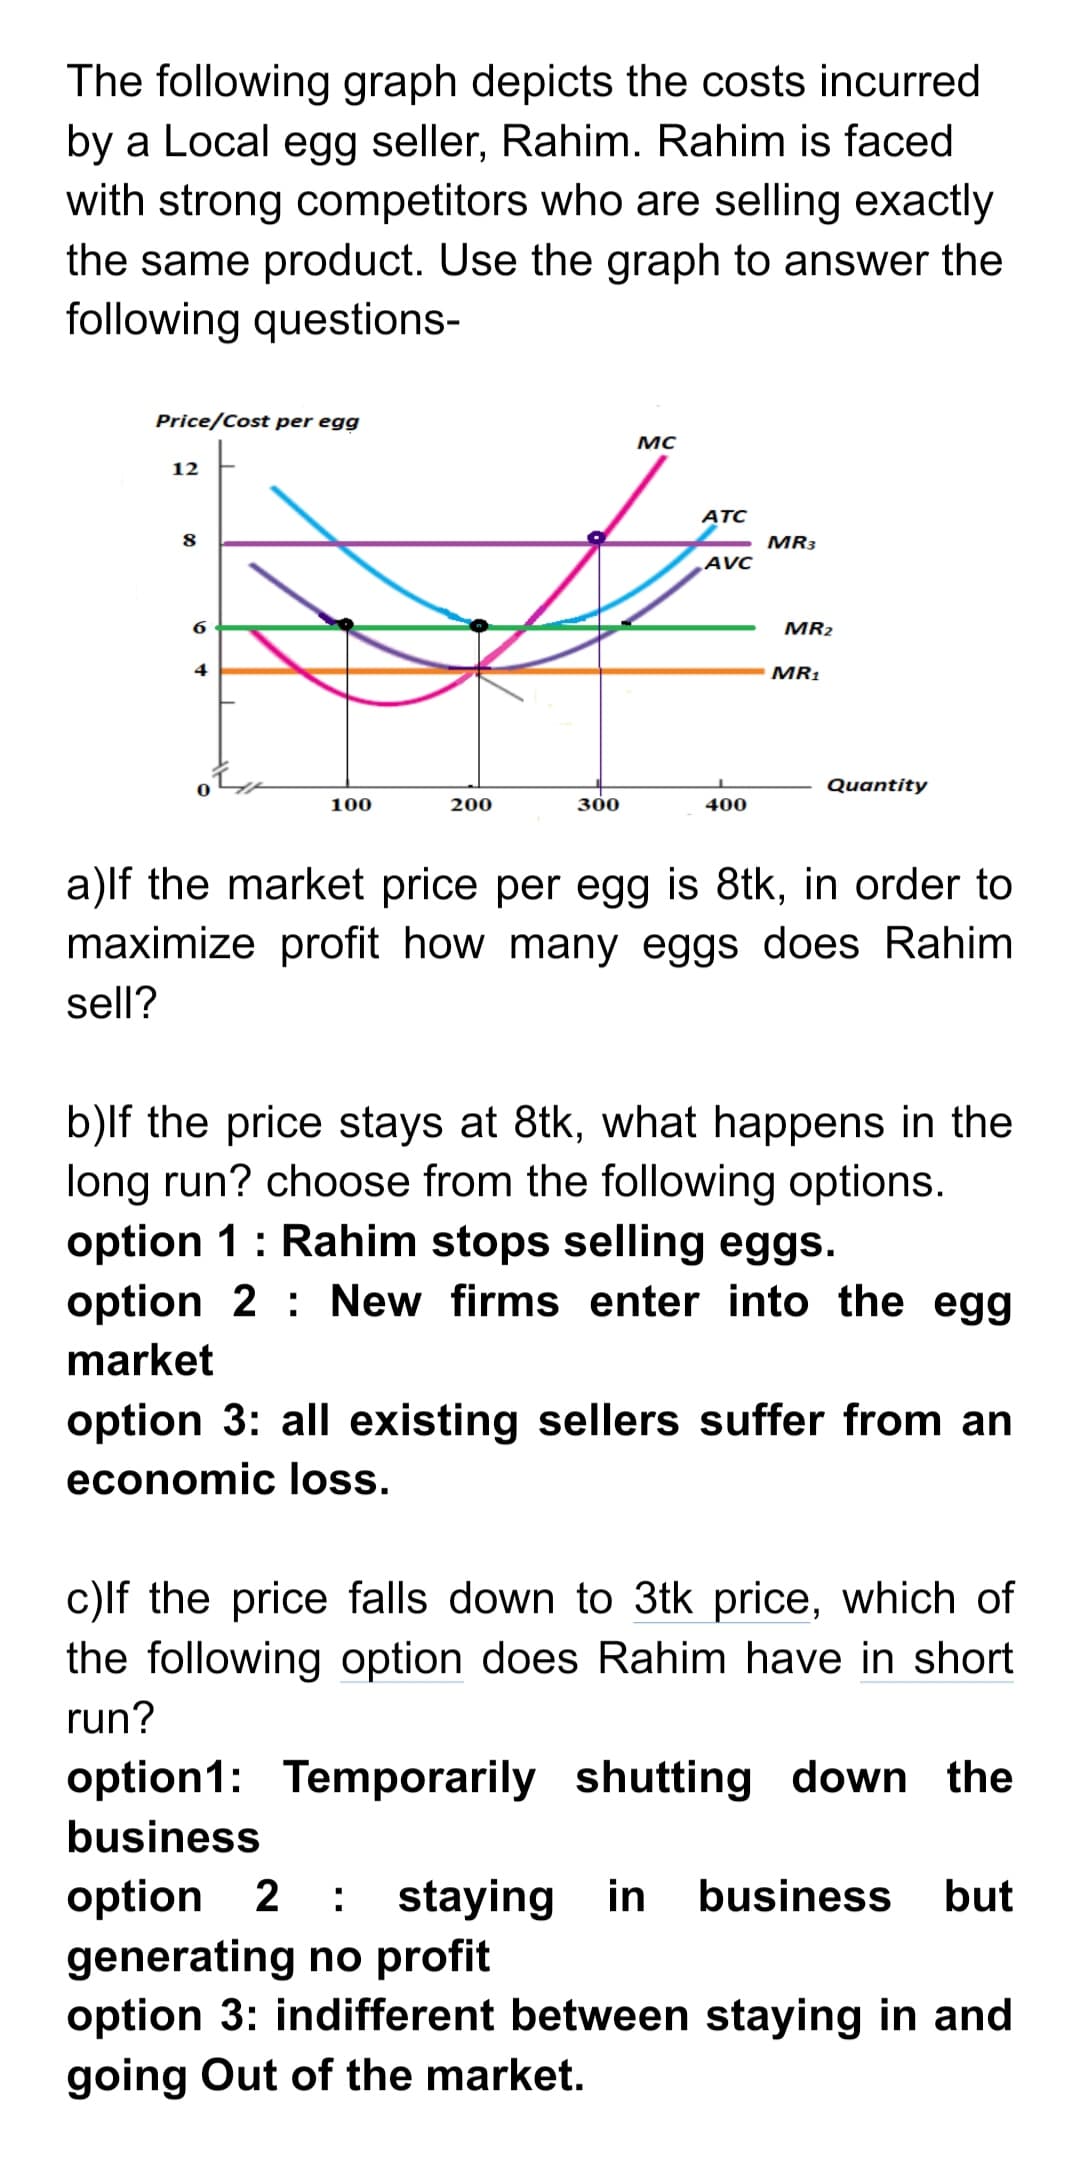 The following graph depicts the costs incurred
by a Local egg seller, Rahim. Rahim is faced
with strong competitors who are selling exactly
the same product. Use the graph to answer the
following questions-
Price/Cost per egg
MC
12
ATC
MR3
AVC
MR2
MR1
Quantity
100
200
300
400
a)lf the market price per egg is 8tk, in order to
maximize profit how many eggs does Rahim
sell?
b)lf the price stays at 8tk, what happens in the
long run? choose from the following options.
option 1: Rahim stops selling eggs.
option 2 : New firms enter into the egg
market
option 3: all existing sellers suffer from an
economic loss.
c)lf the price falls down to 3tk price, which of
the following option does Rahim have in short
run?
option1: Temporarily shutting down the
business
business
option 2 : staying in
generating no profit
option 3: indifferent between staying in and
going Out of the market.
but
